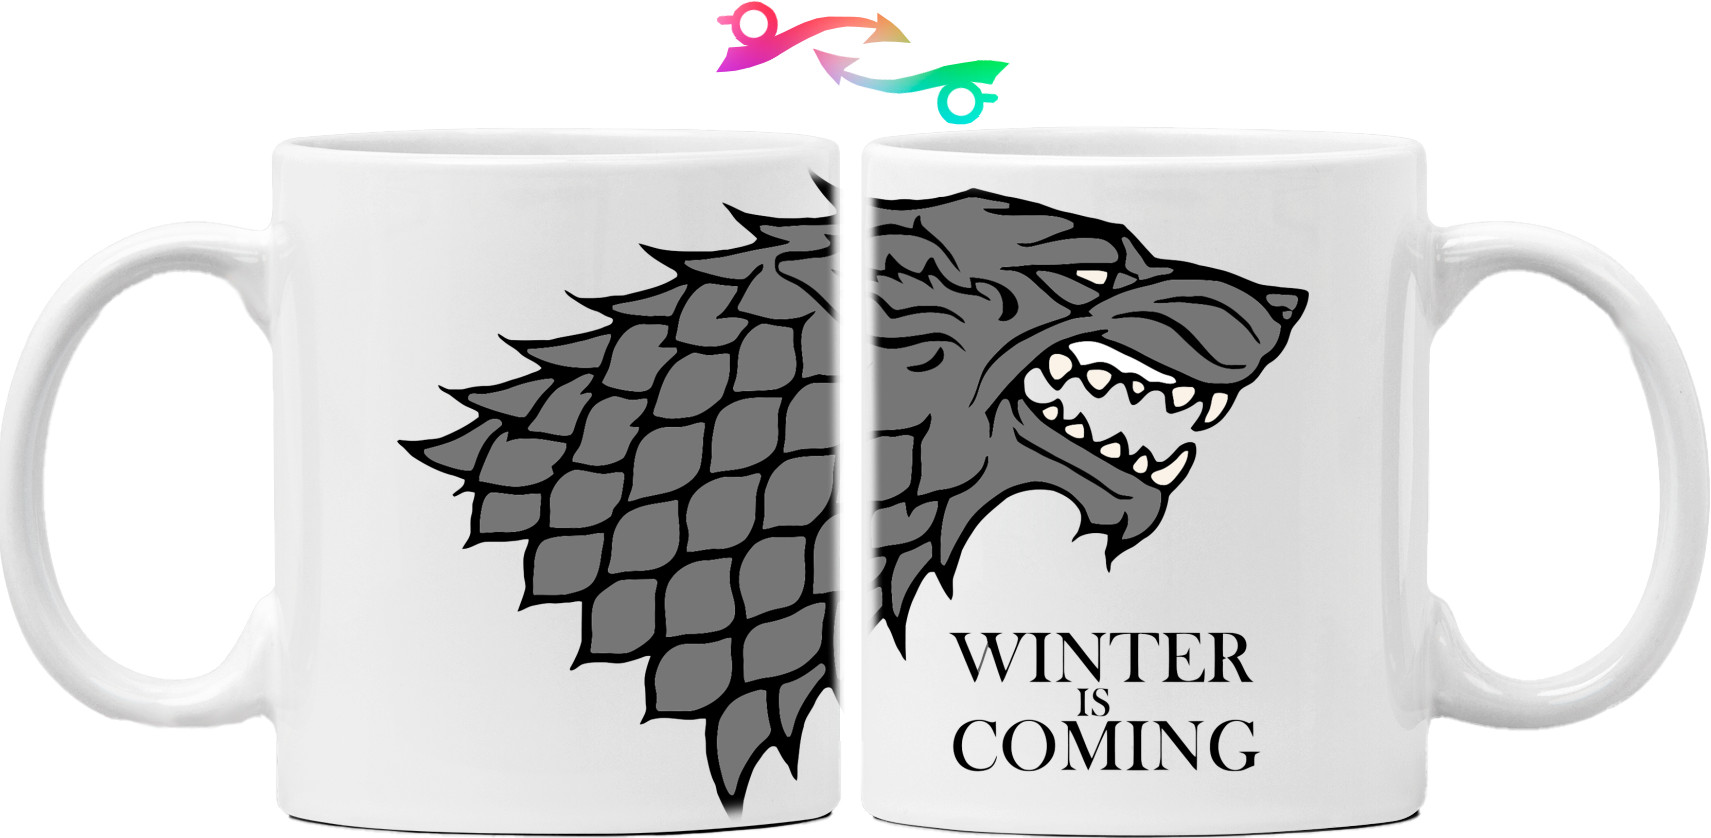 Winter is coming 3